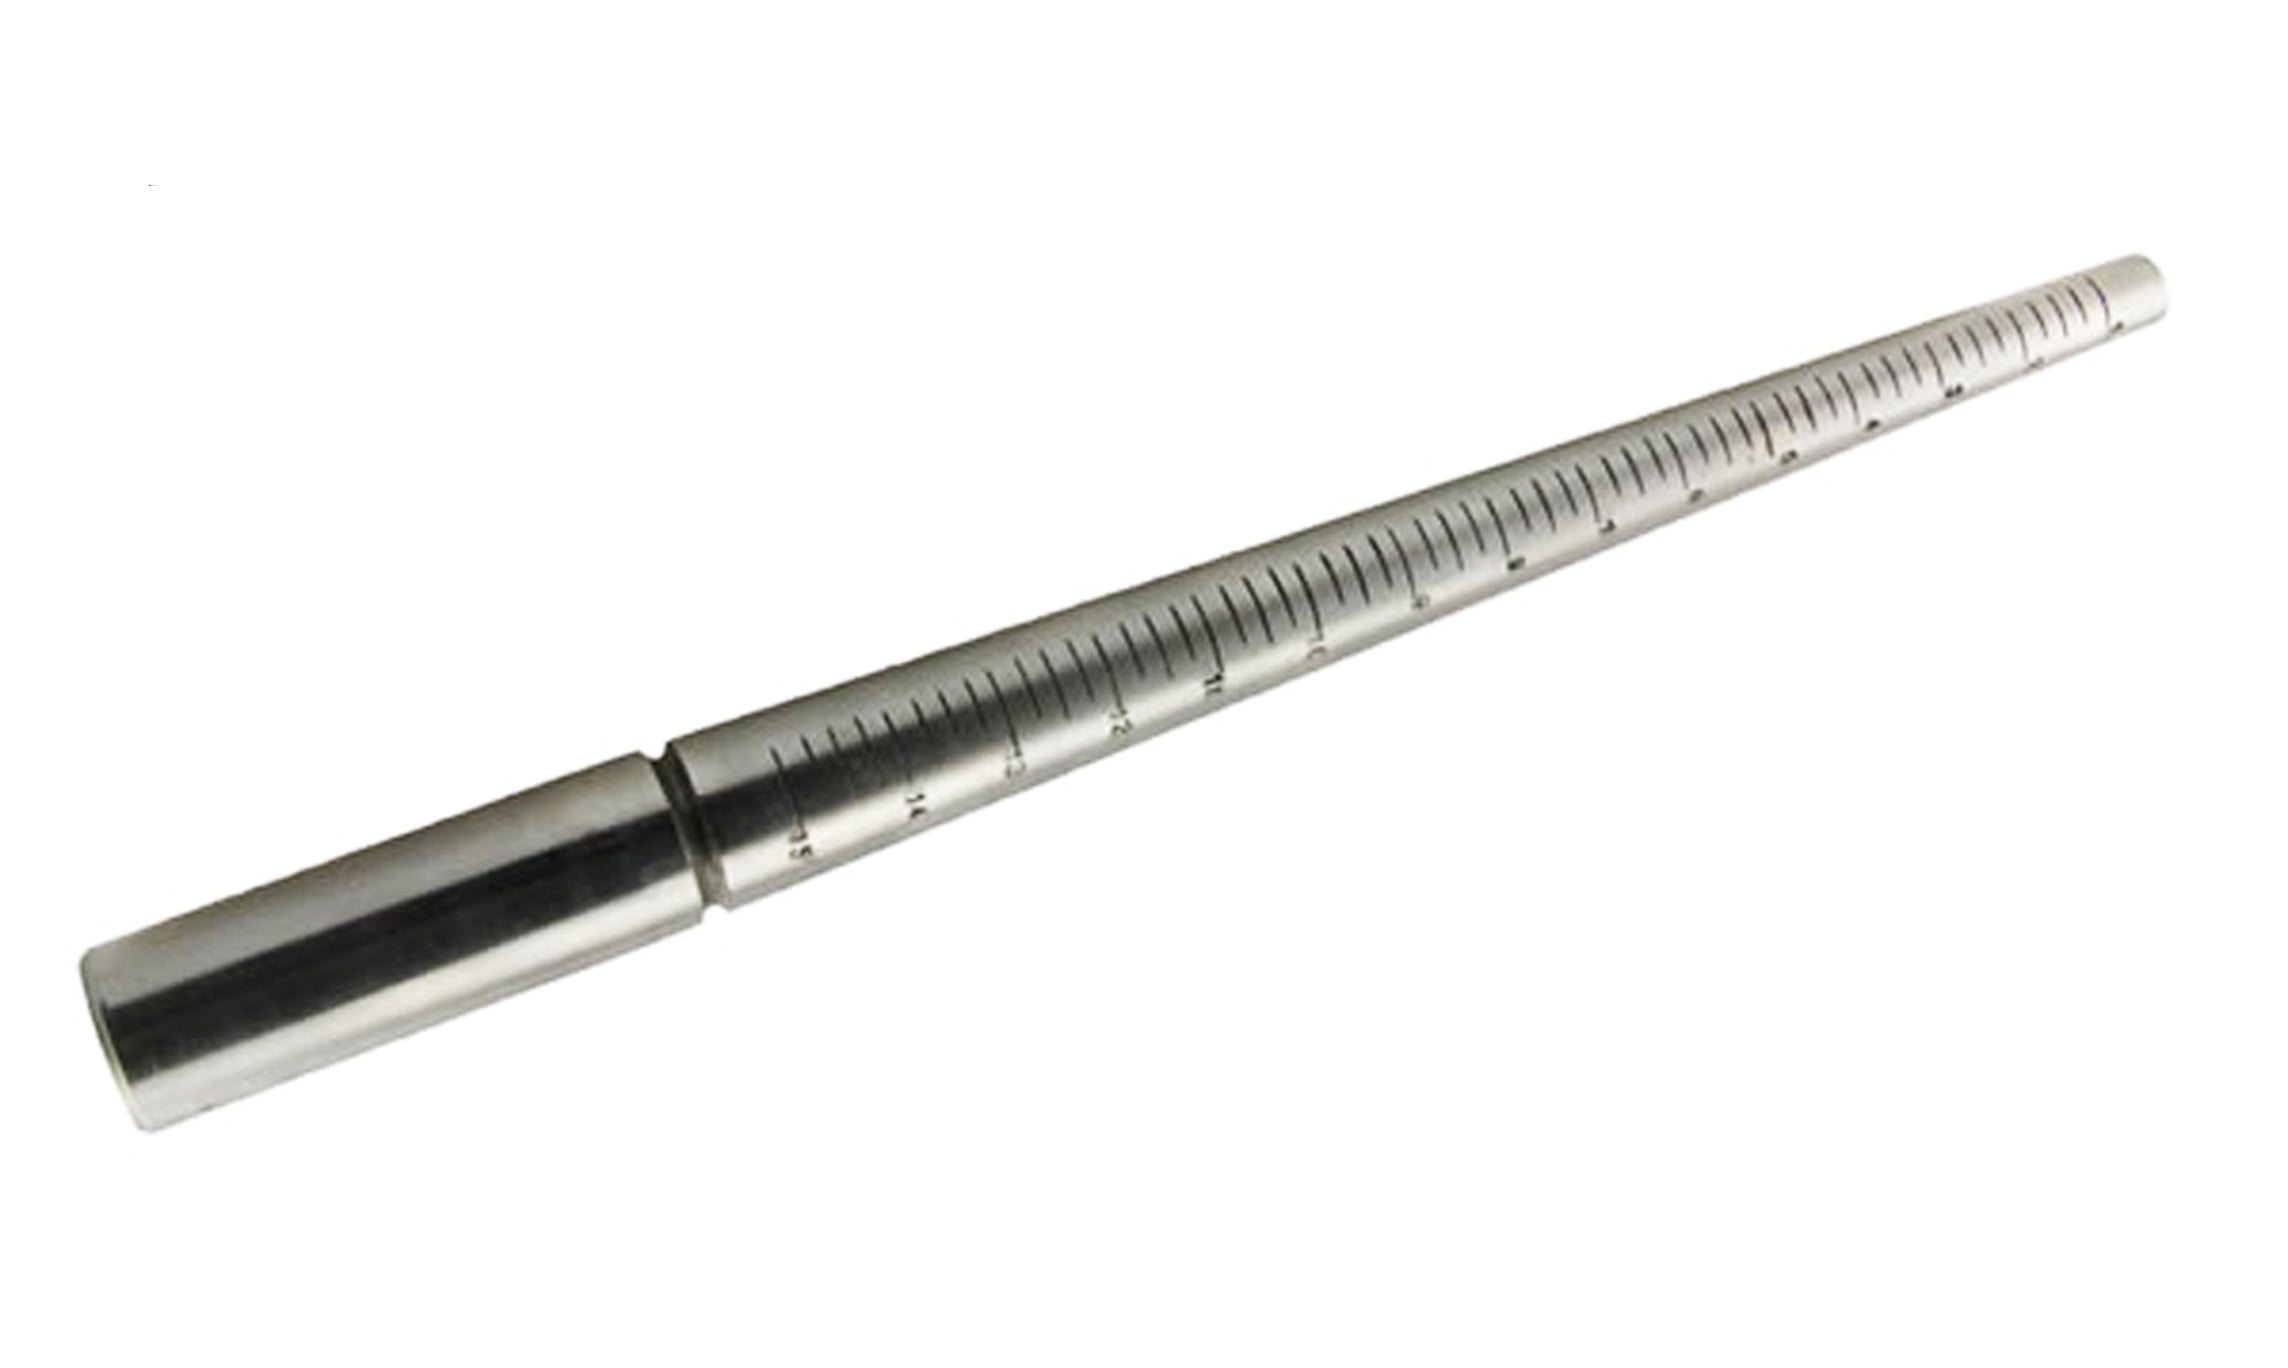 STAINLESS STEEL RING MANDREL 1-16 with ring blank gauge 